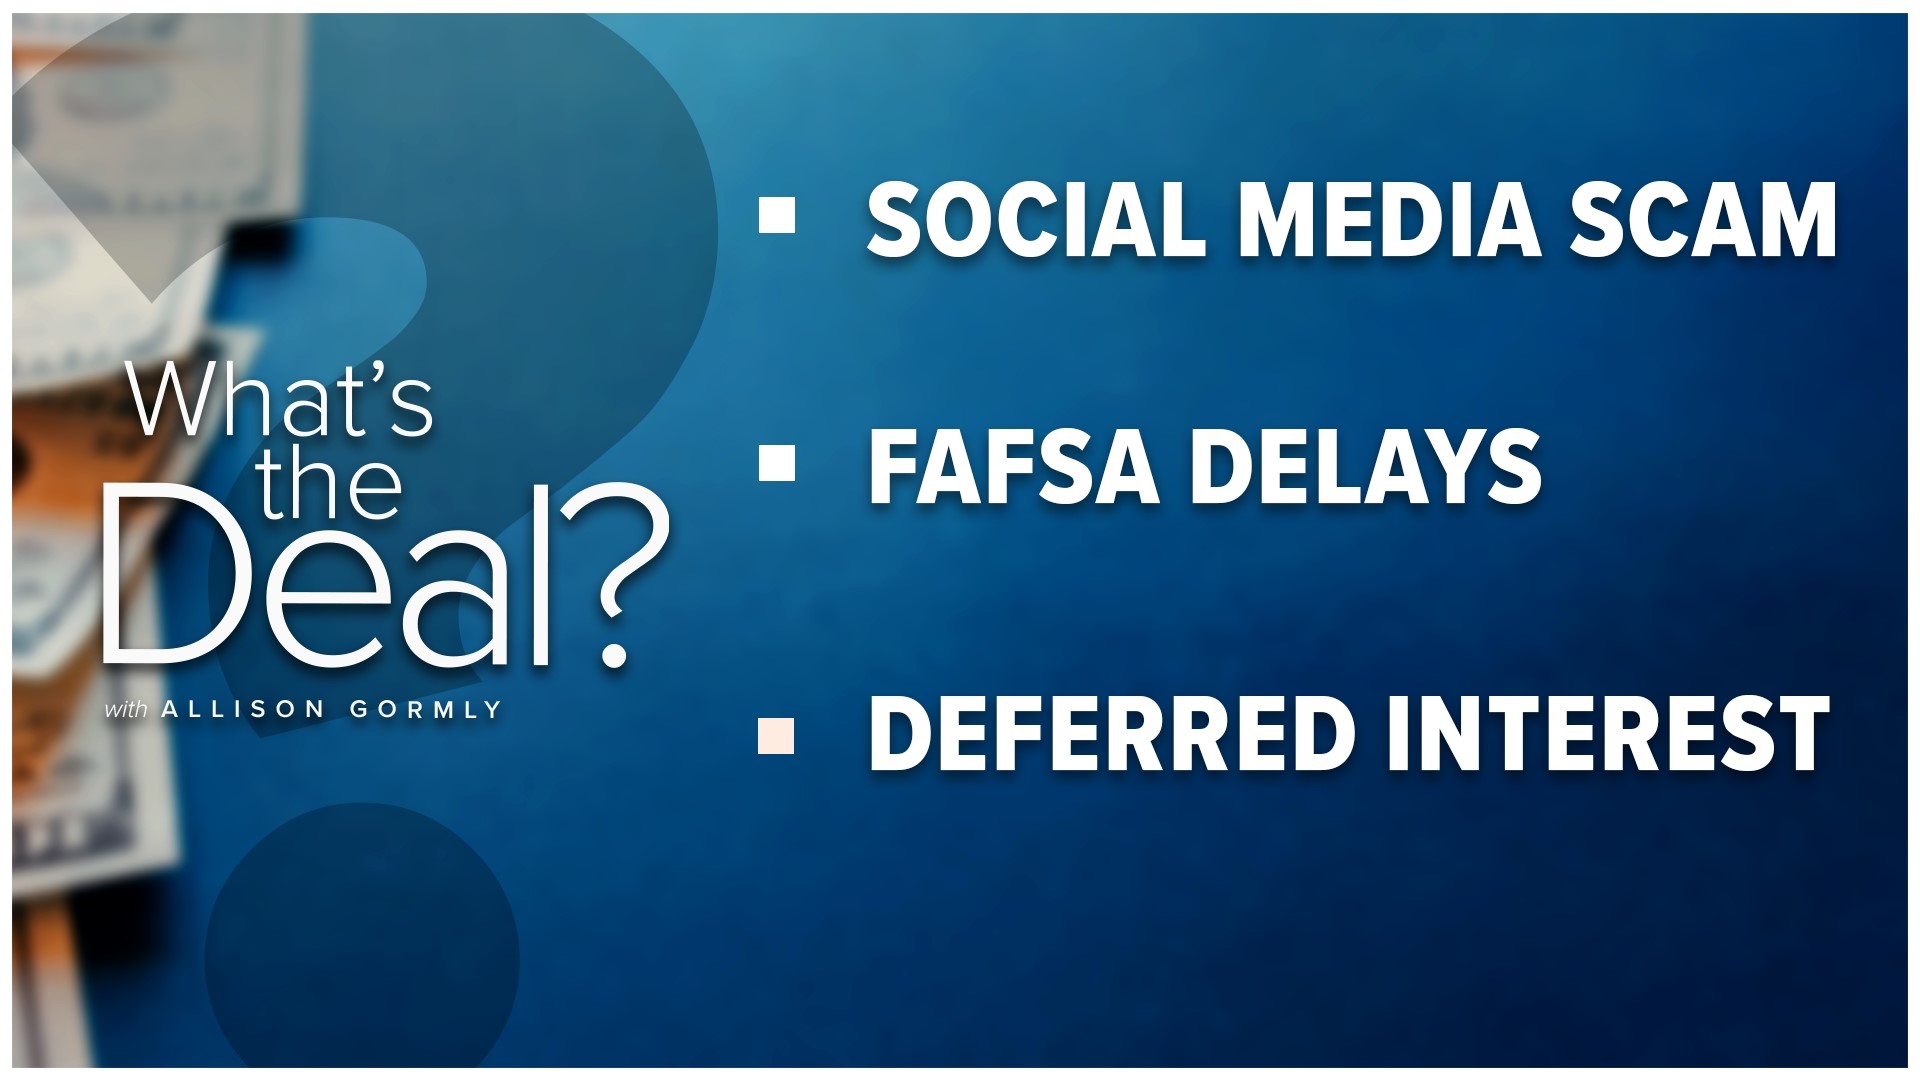 What you need to know about a social media scam that can cost you and the tool you can use to calculate costs for college as you wait for FAFSA.